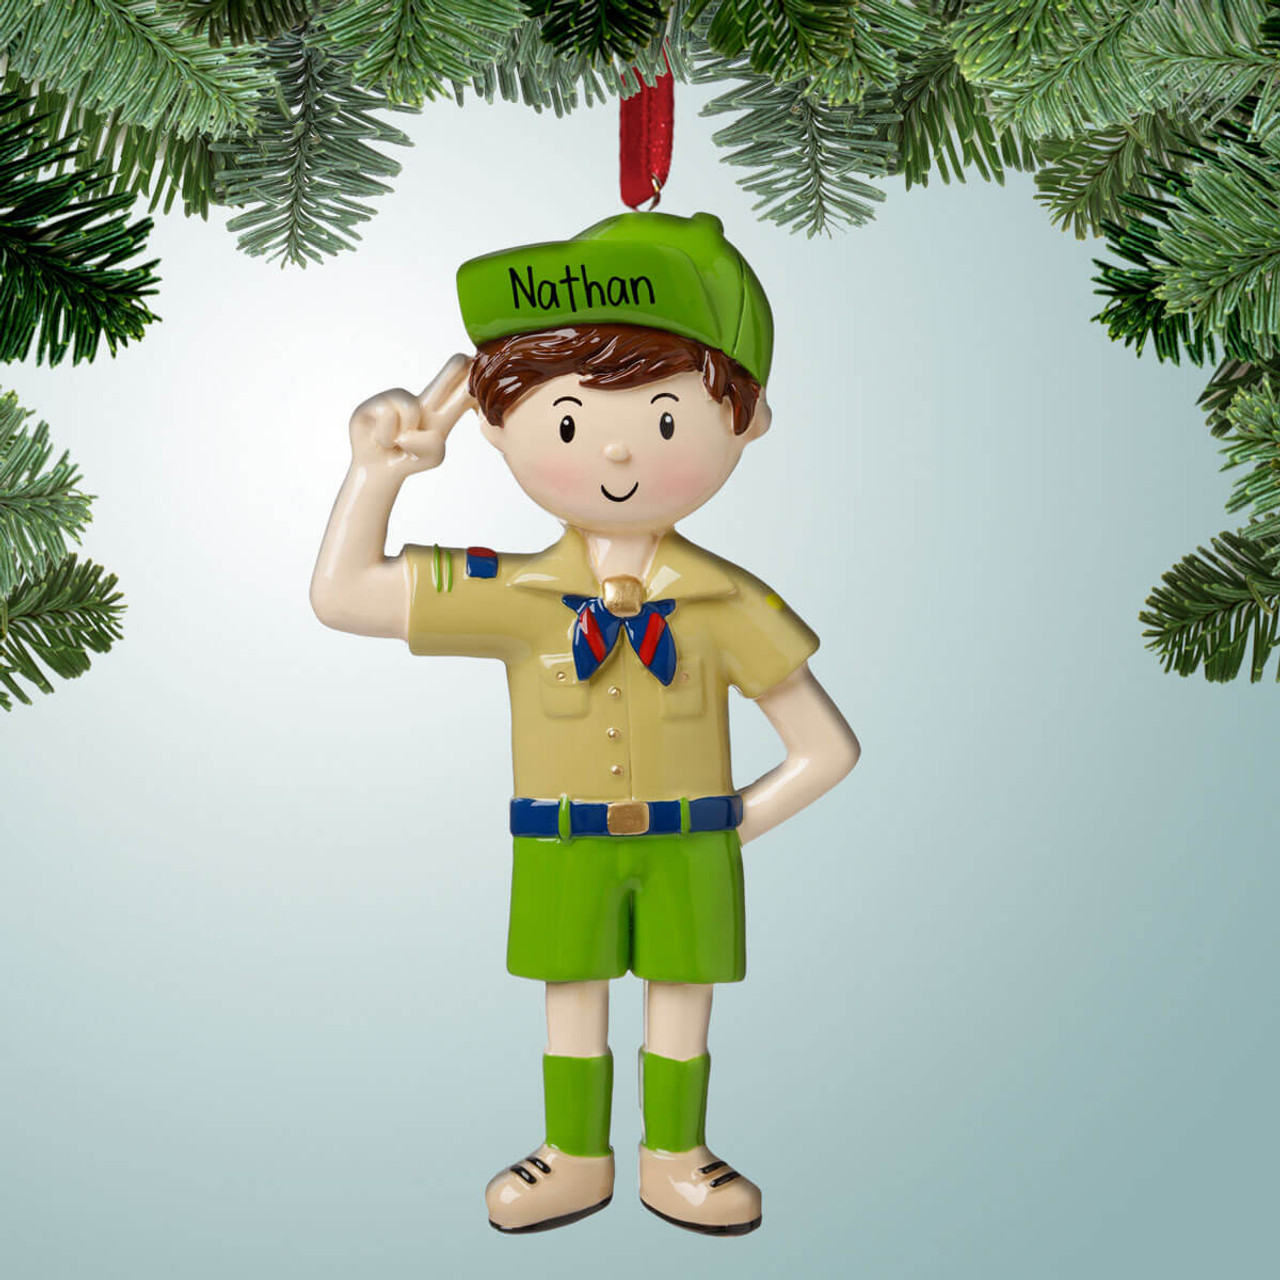  Personalized Boy Scouts Christmas Ornament - Scouts of America  Khaki Tan Youth Scout or Scout Leader Uniform with Neck Slide and Badges  Christmas Tree Ornament with Custom Name : Home 